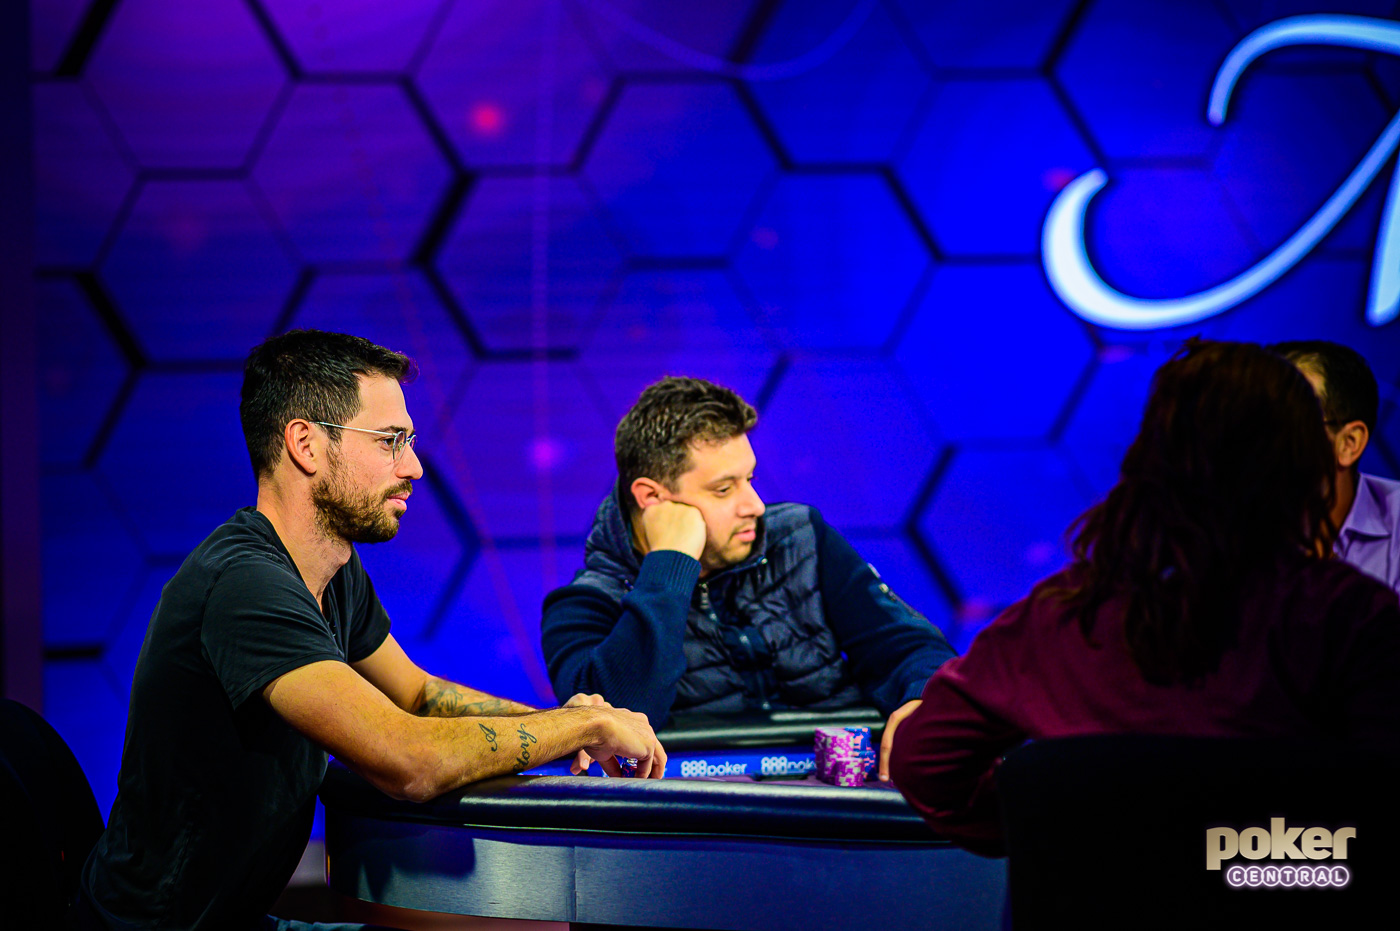 Nick Schulman and Jared Bleznick battle it out at the final table.